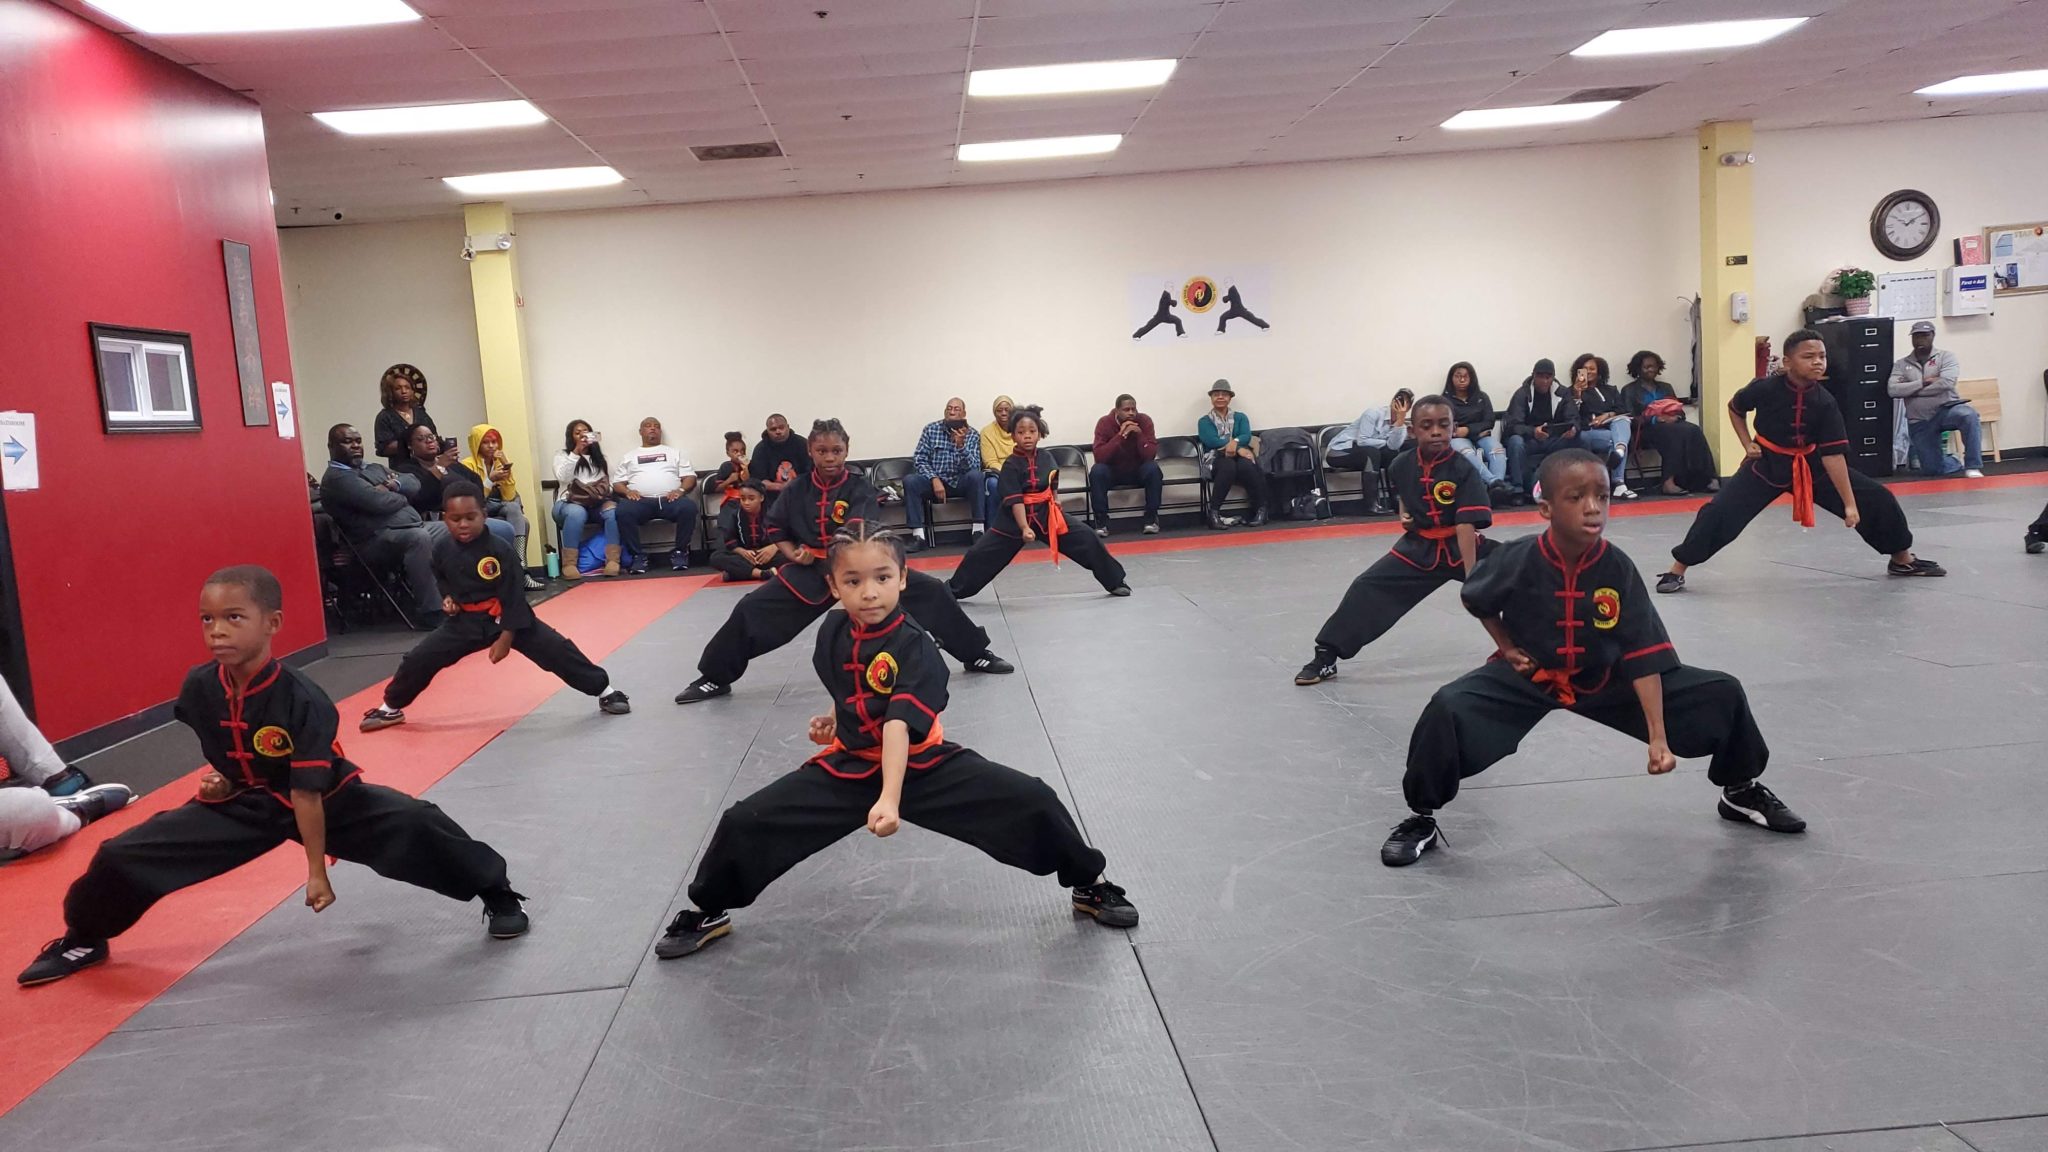 About the Art - Superior Martial Arts Training Center